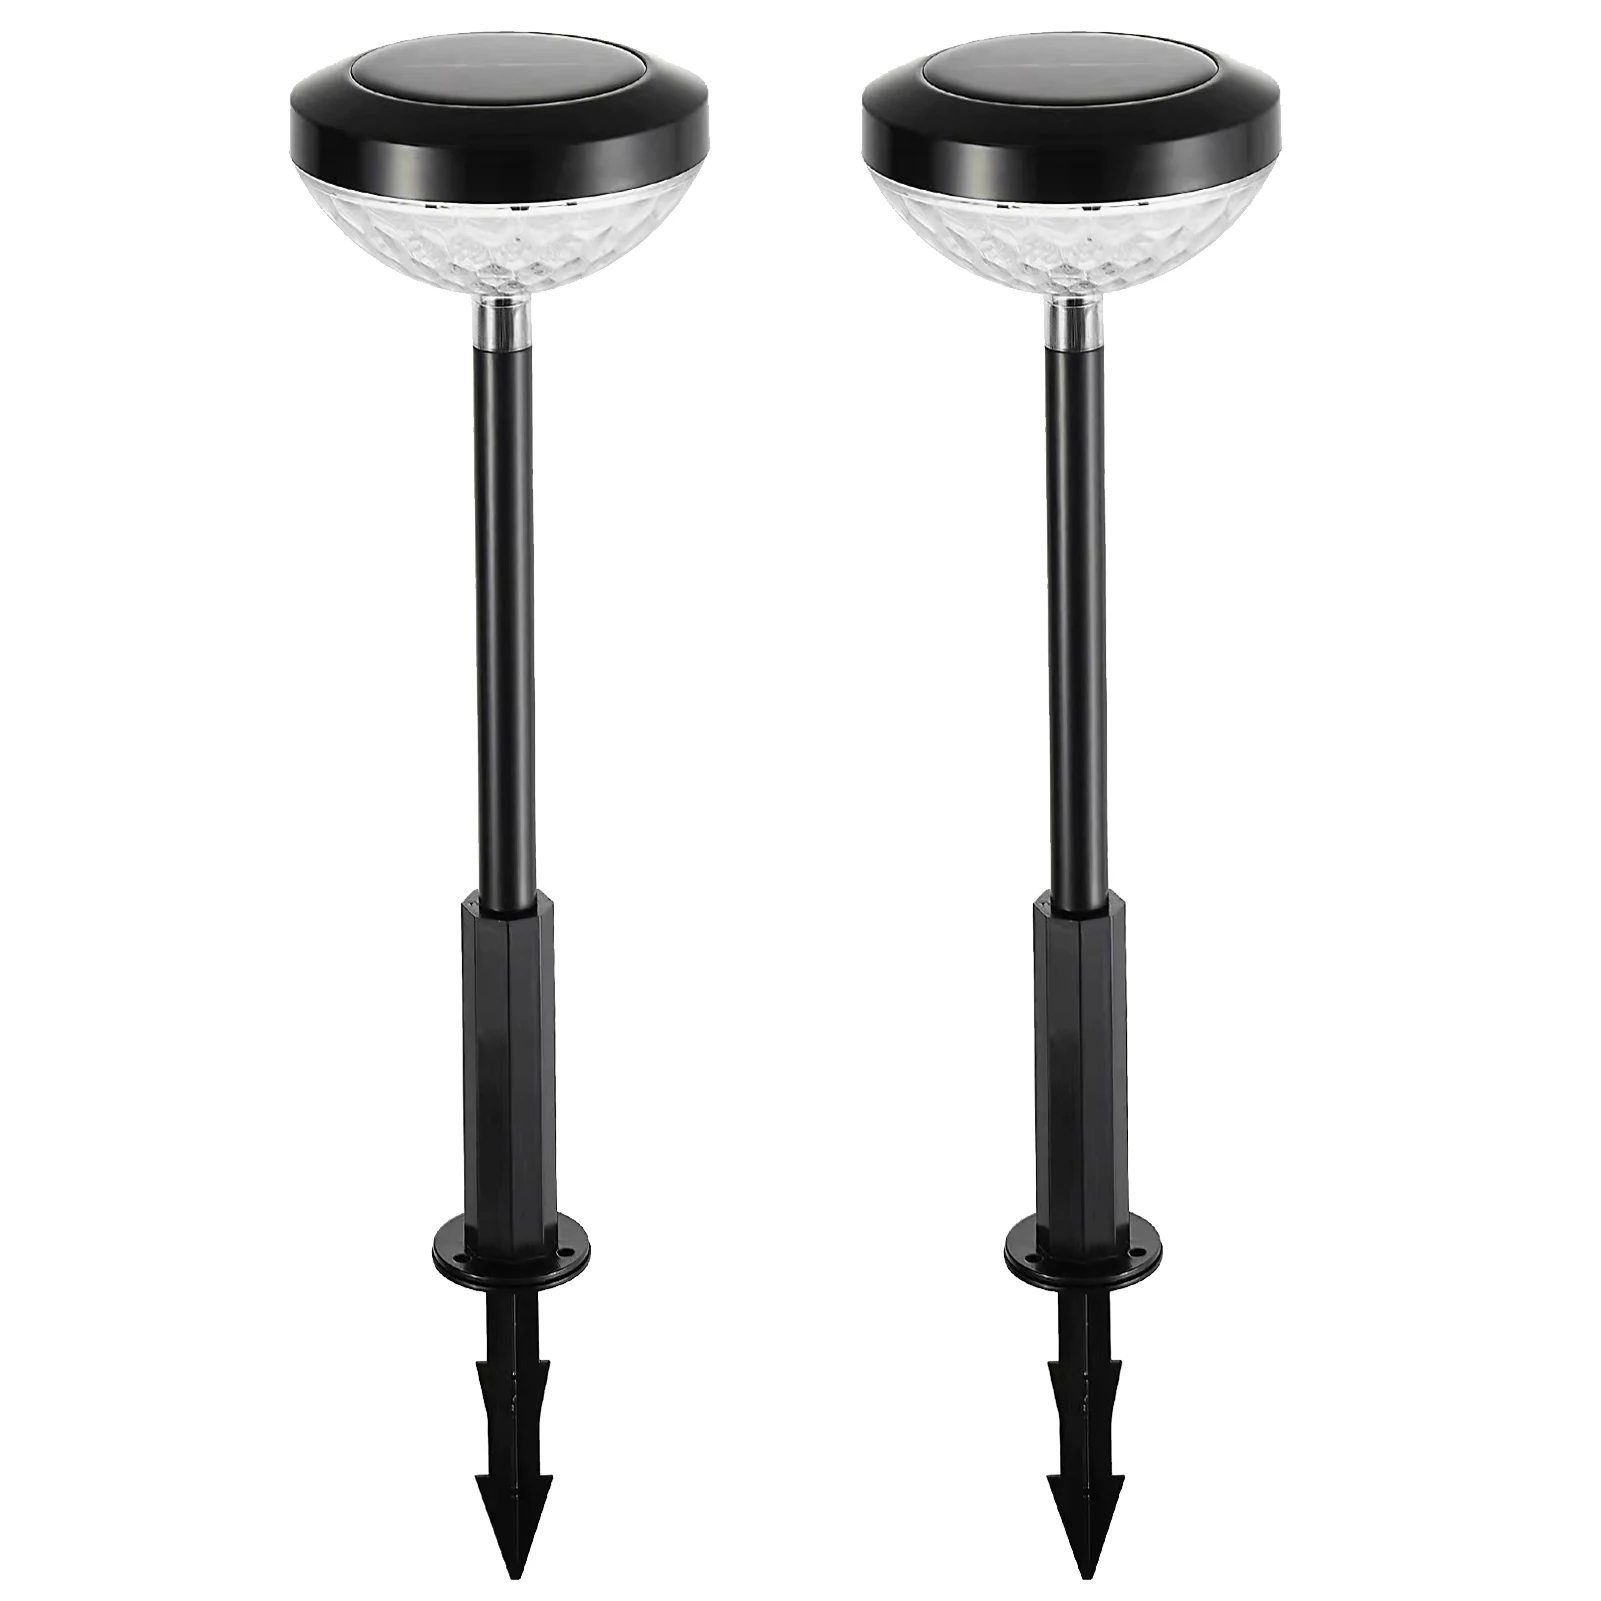 

2pcs/pack Yard Projection Solar Powered RGB Color Changing Lawn Ground Stake Garden Light Landscape 2 Adjustable Modes Pathway